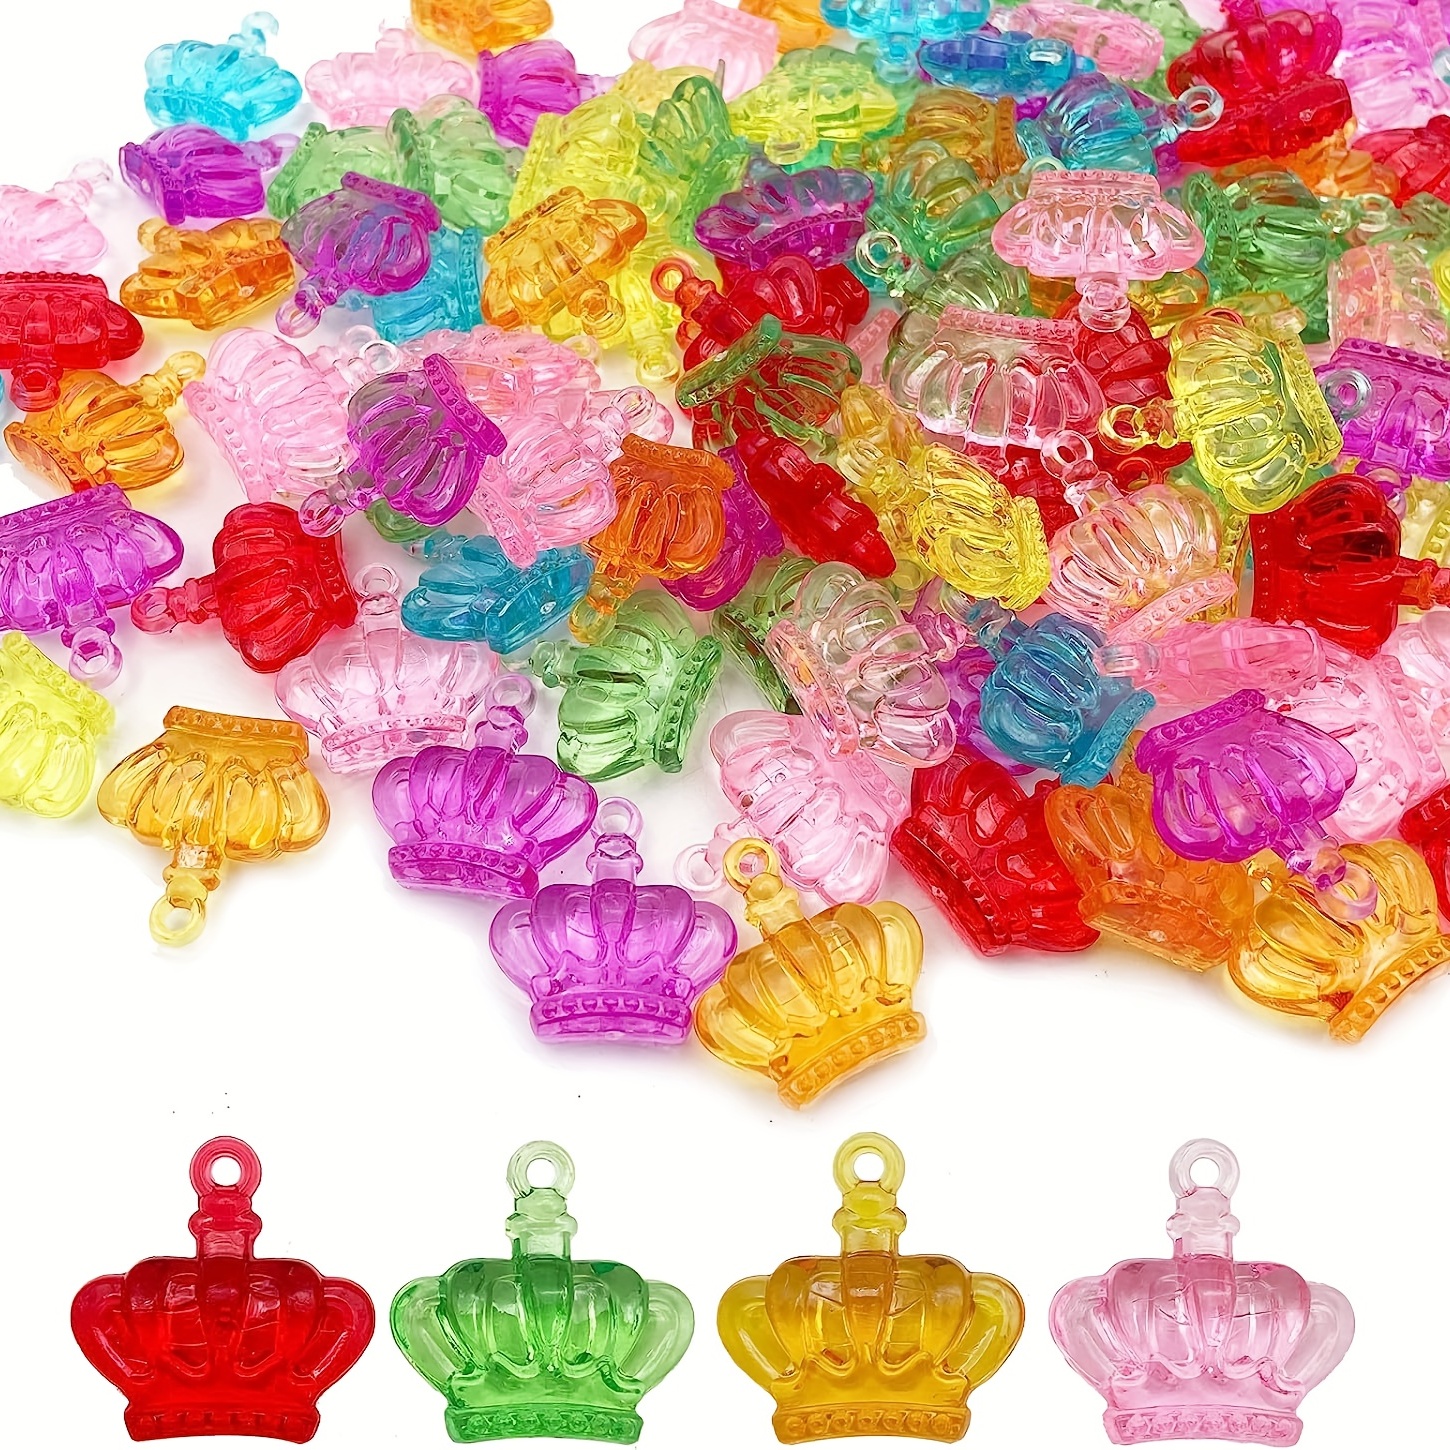 Over 150PCS Assorted Pirate Treasure Gems 1LBS Acrylic Plastic Jewels for  Party & Games Table Scatter Vase Fillers Wedding Decor Favors 